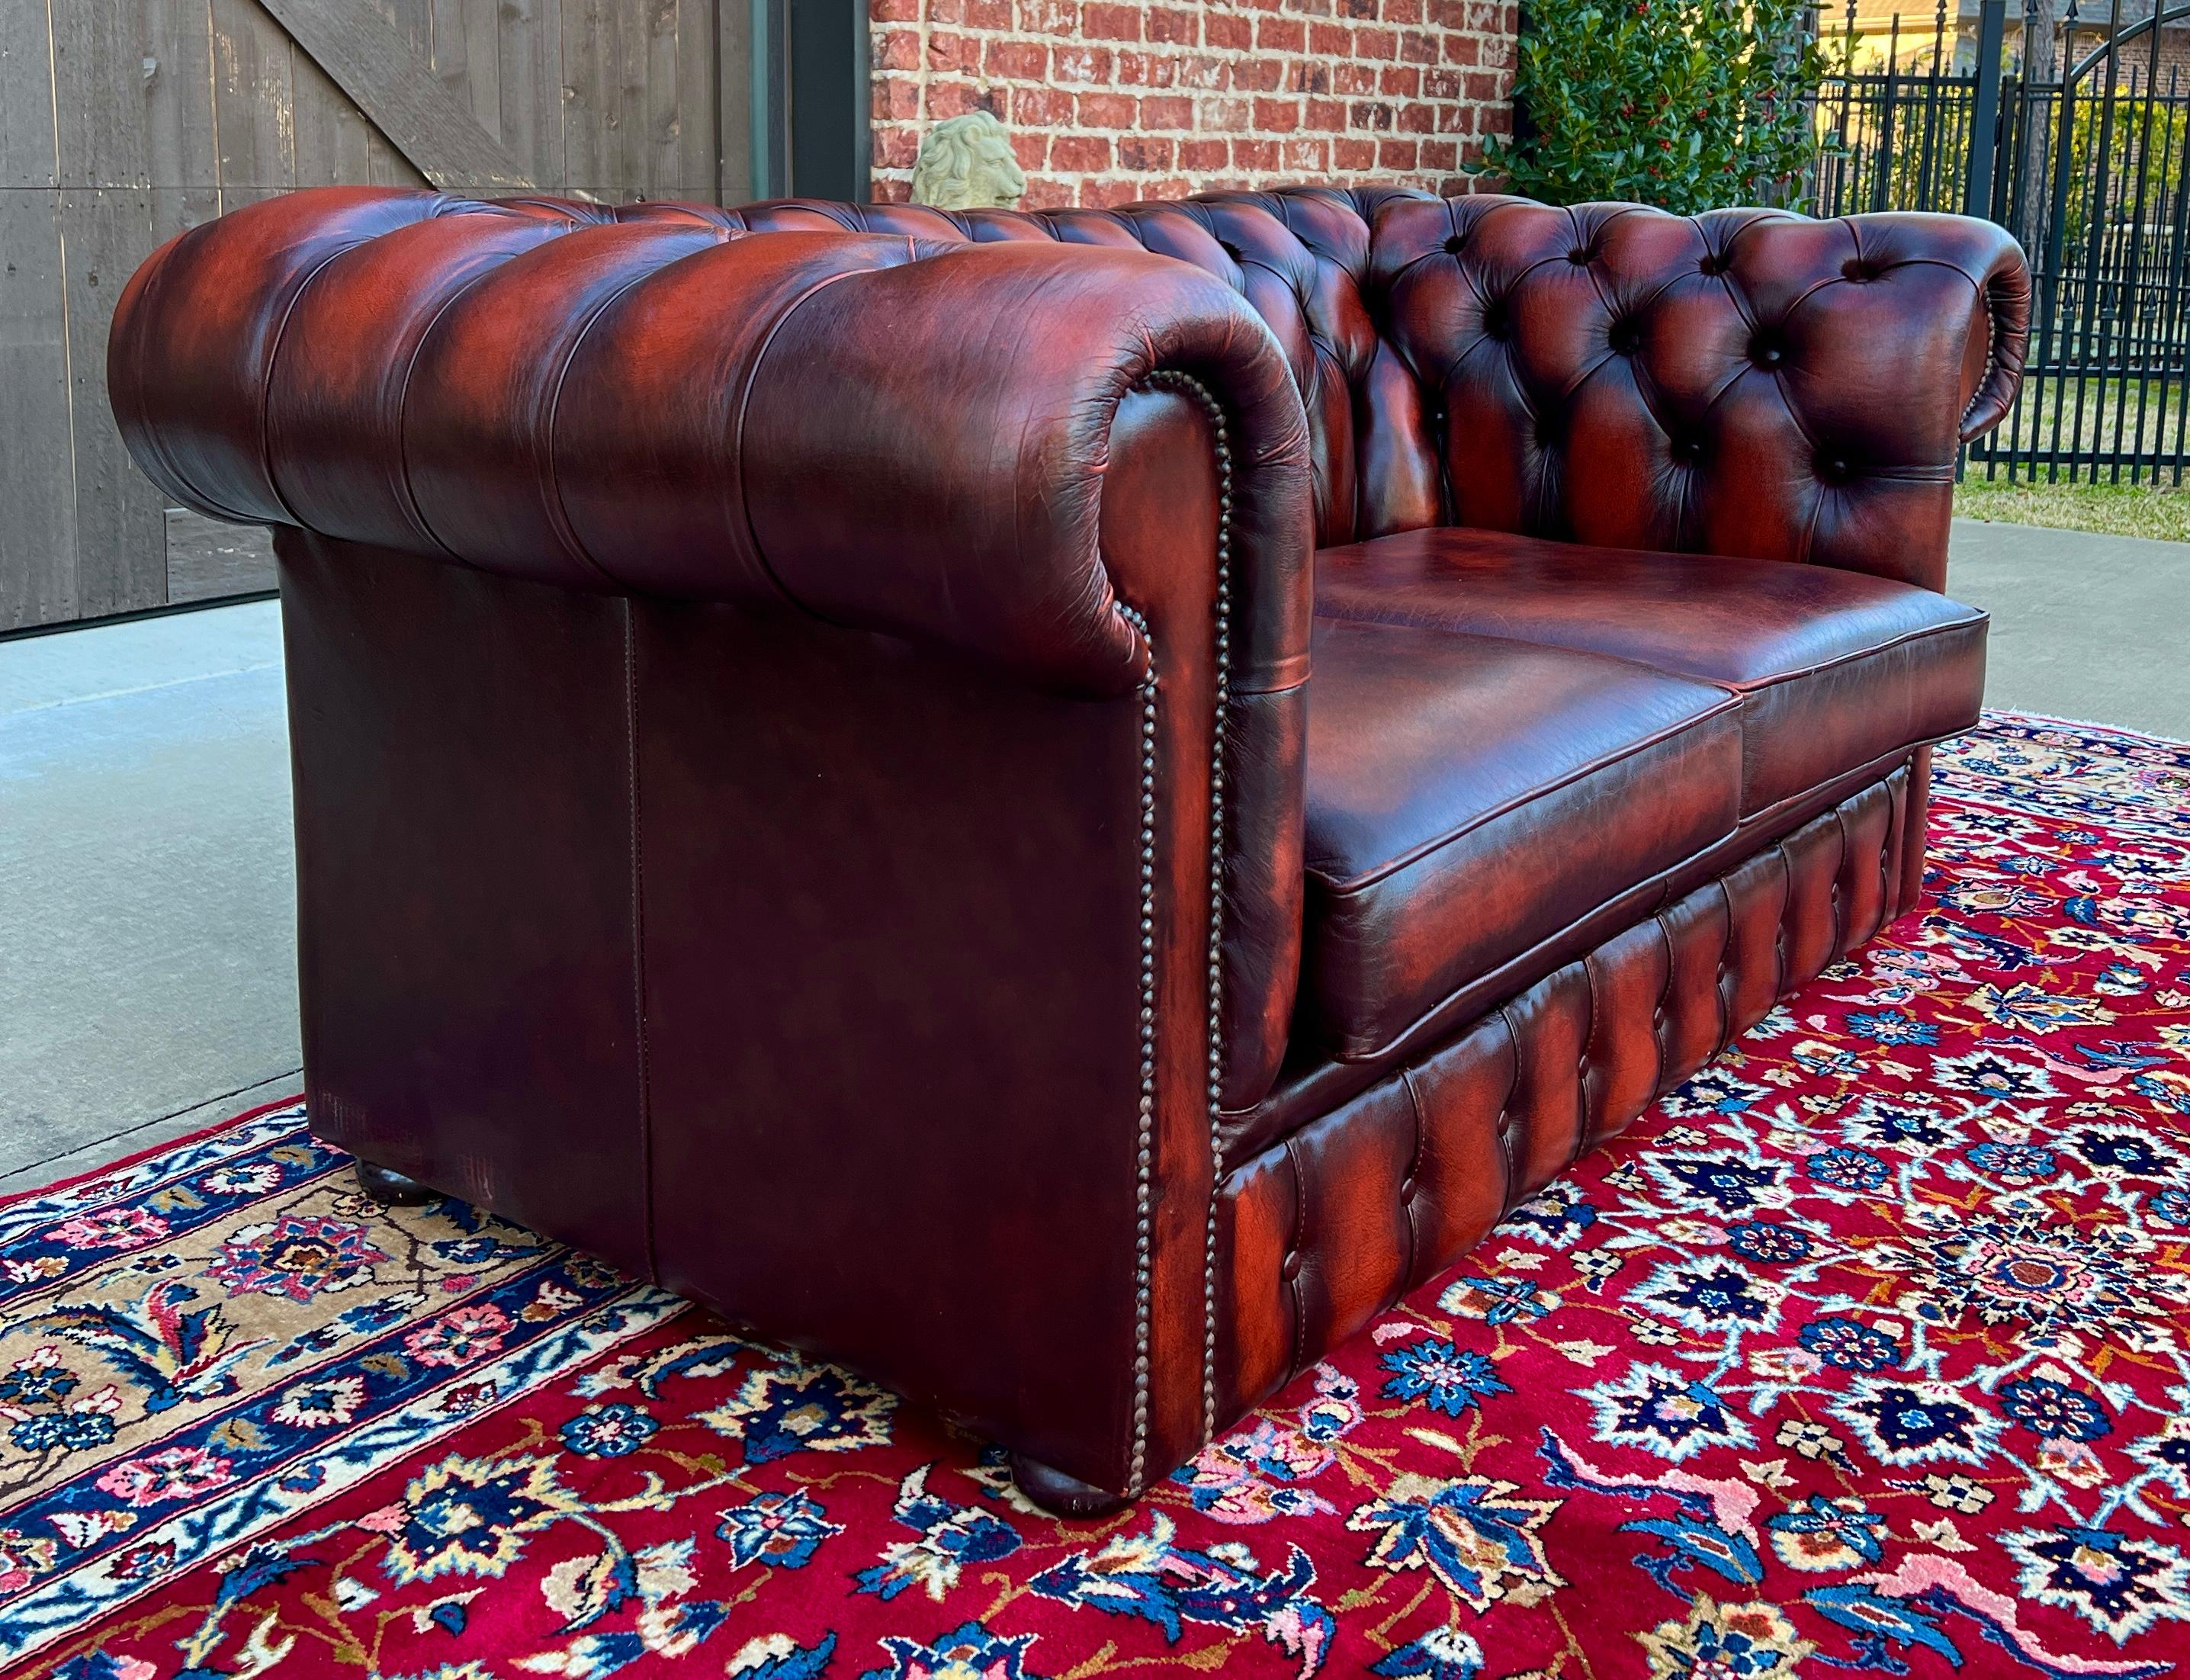 20th Century Vintage English Chesterfield Leather Tufted Love Seat Sofa Oxblood Red #1 For Sale